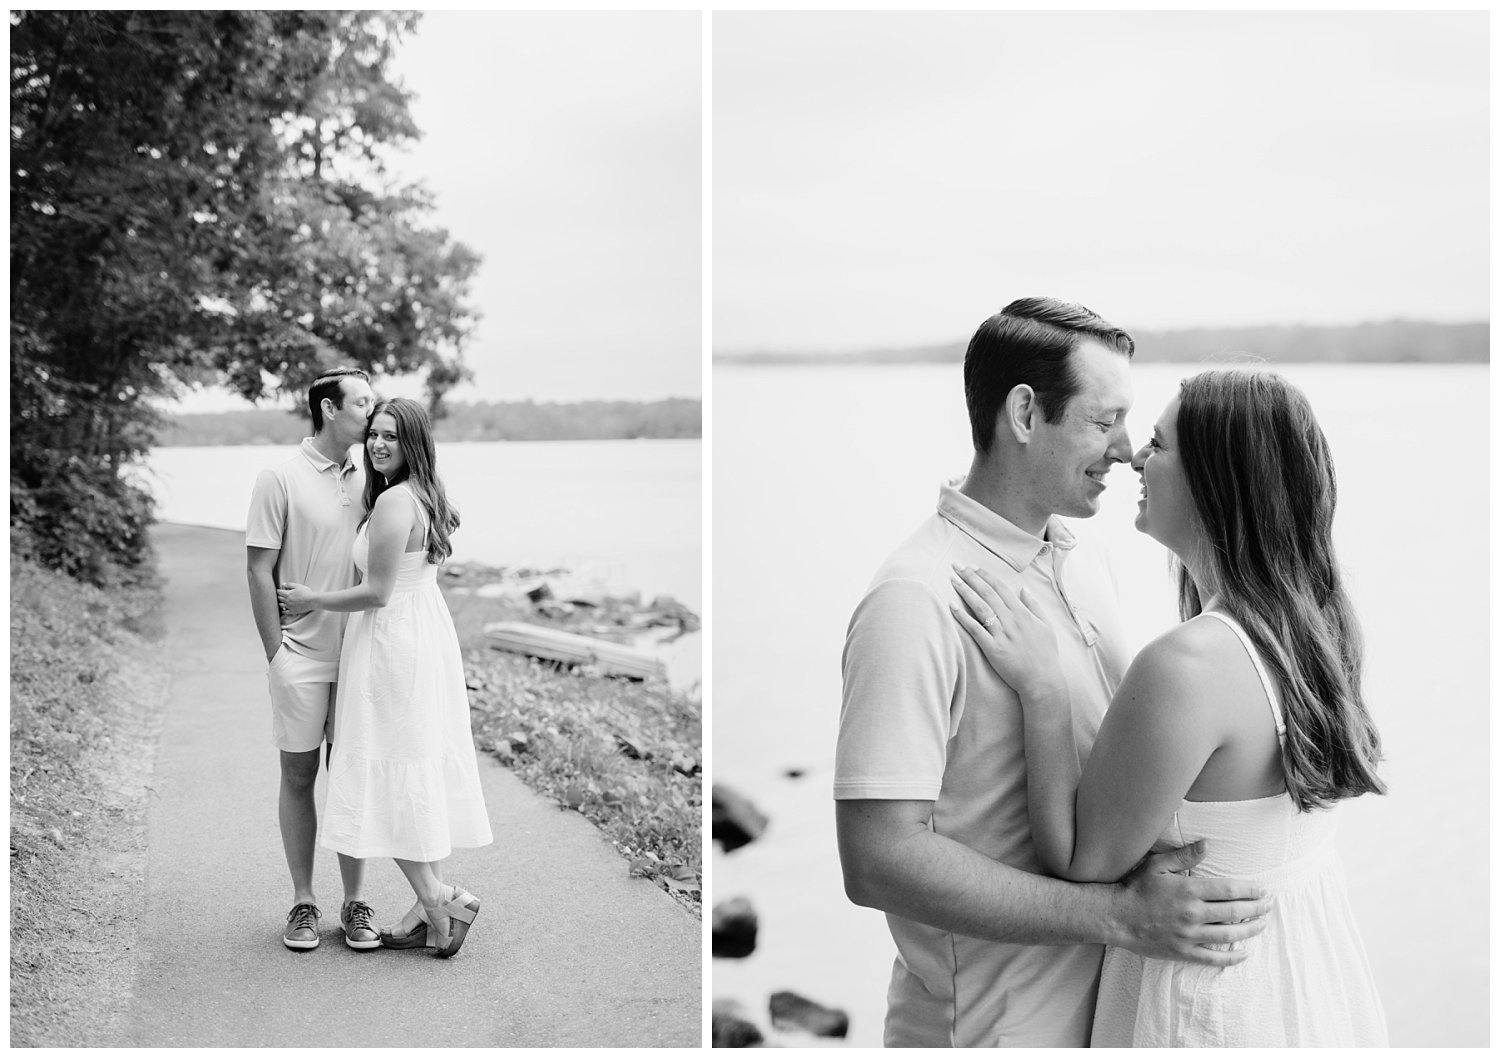 Foggy lakeside engagement session in Richmond, Virginia photographed by Heather Dodge